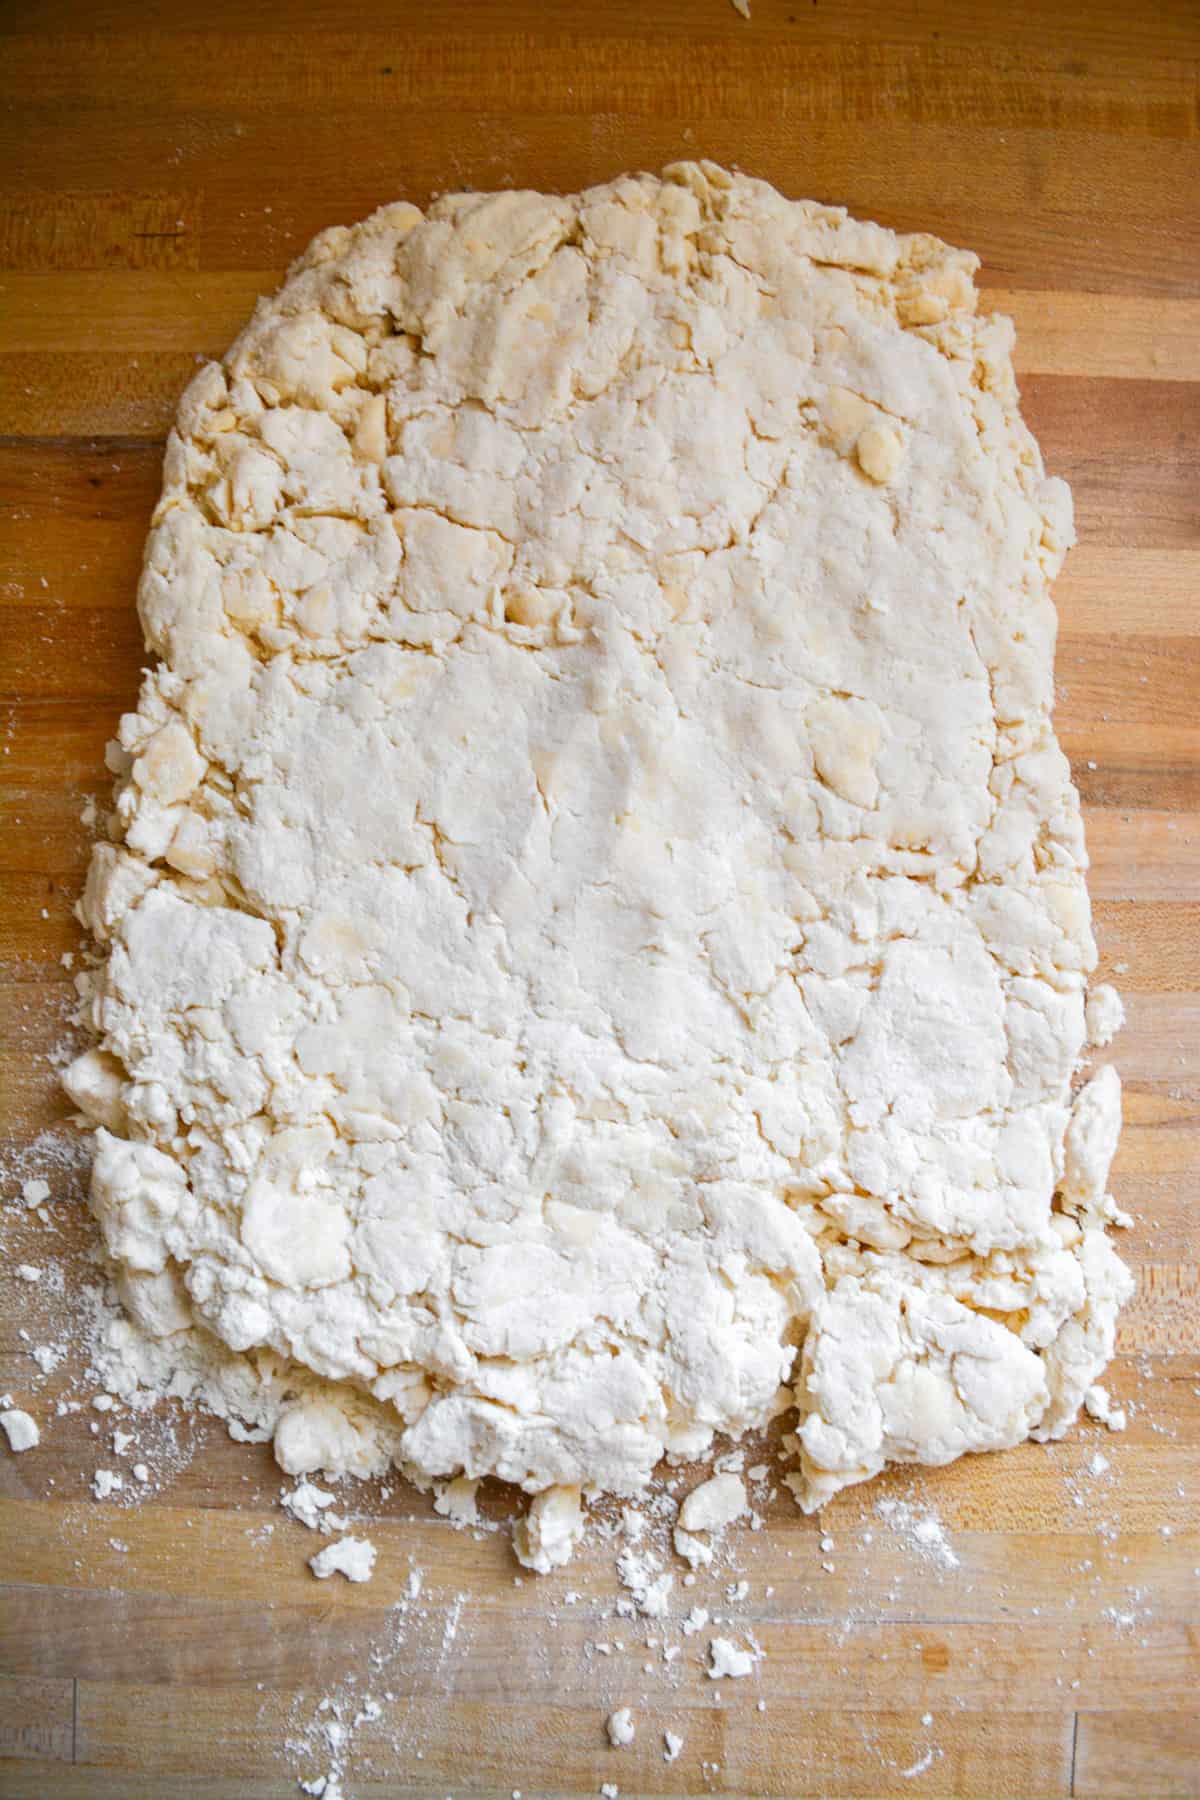 Shaggy biscuit dough pressed out into a rectangle.